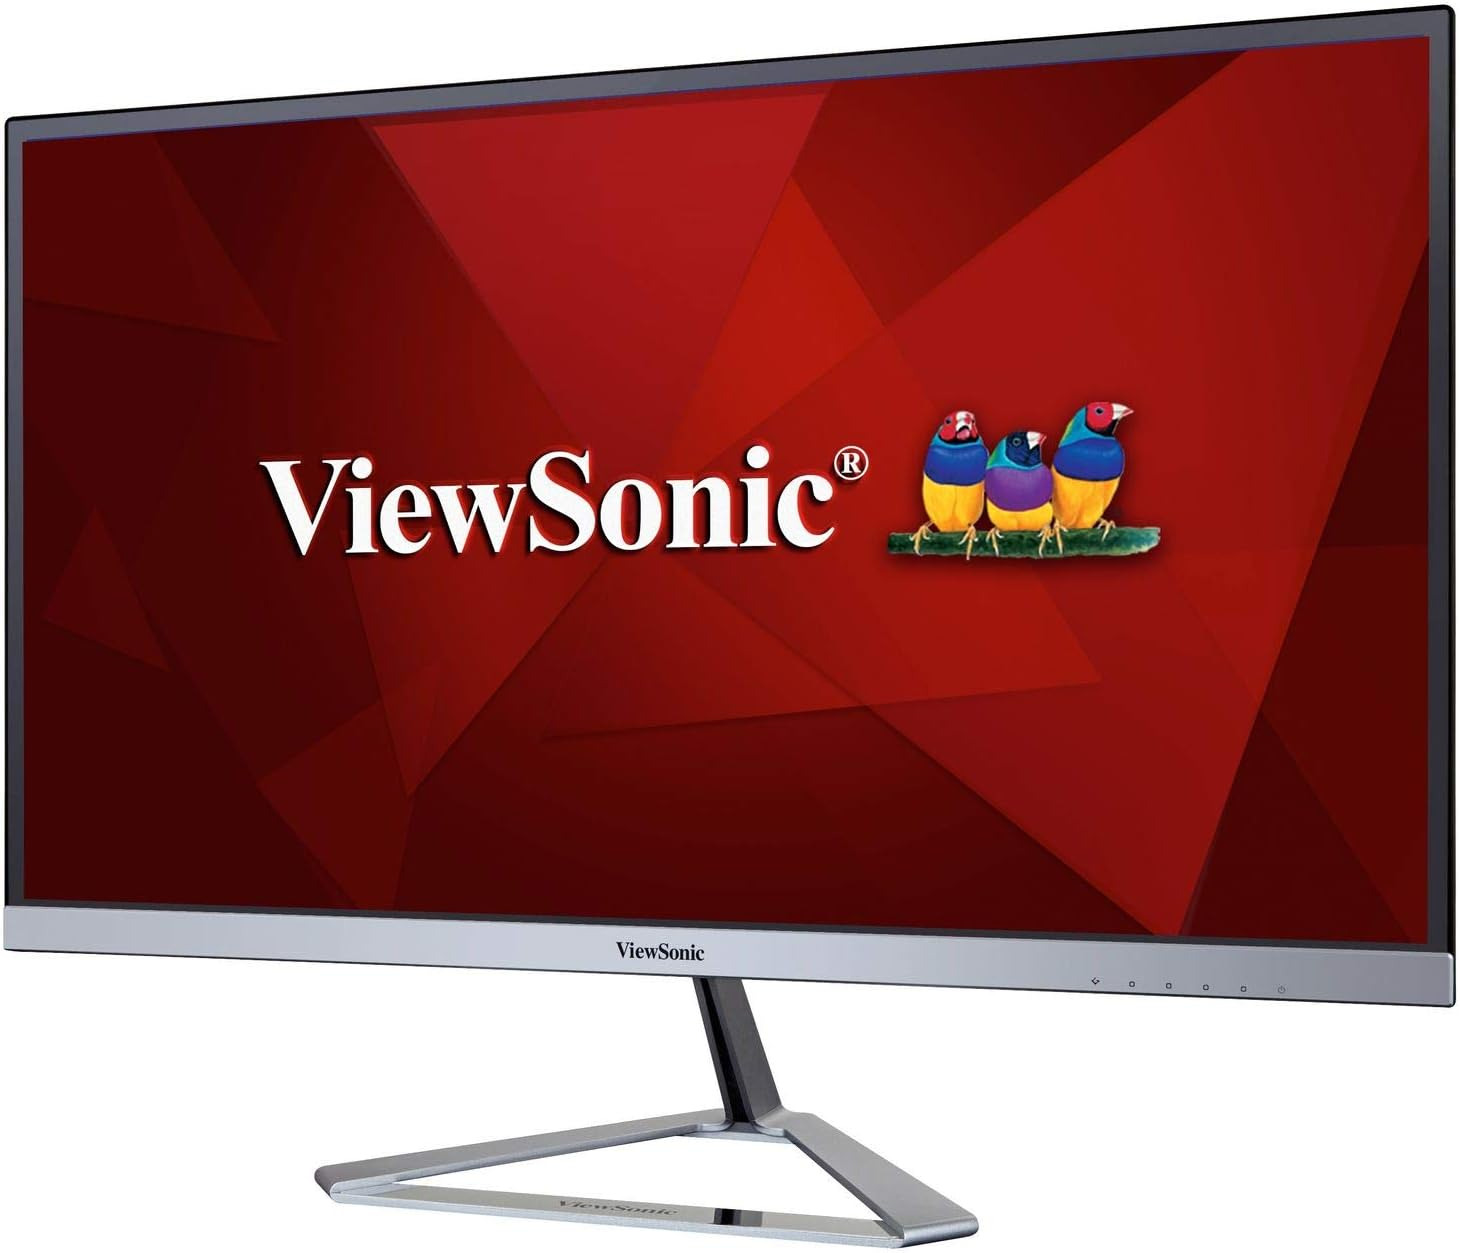 VX2476-SMHD 24 Inch 1080P Widescreen IPS Monitor with Ultra-Thin Bezels, HDMI an